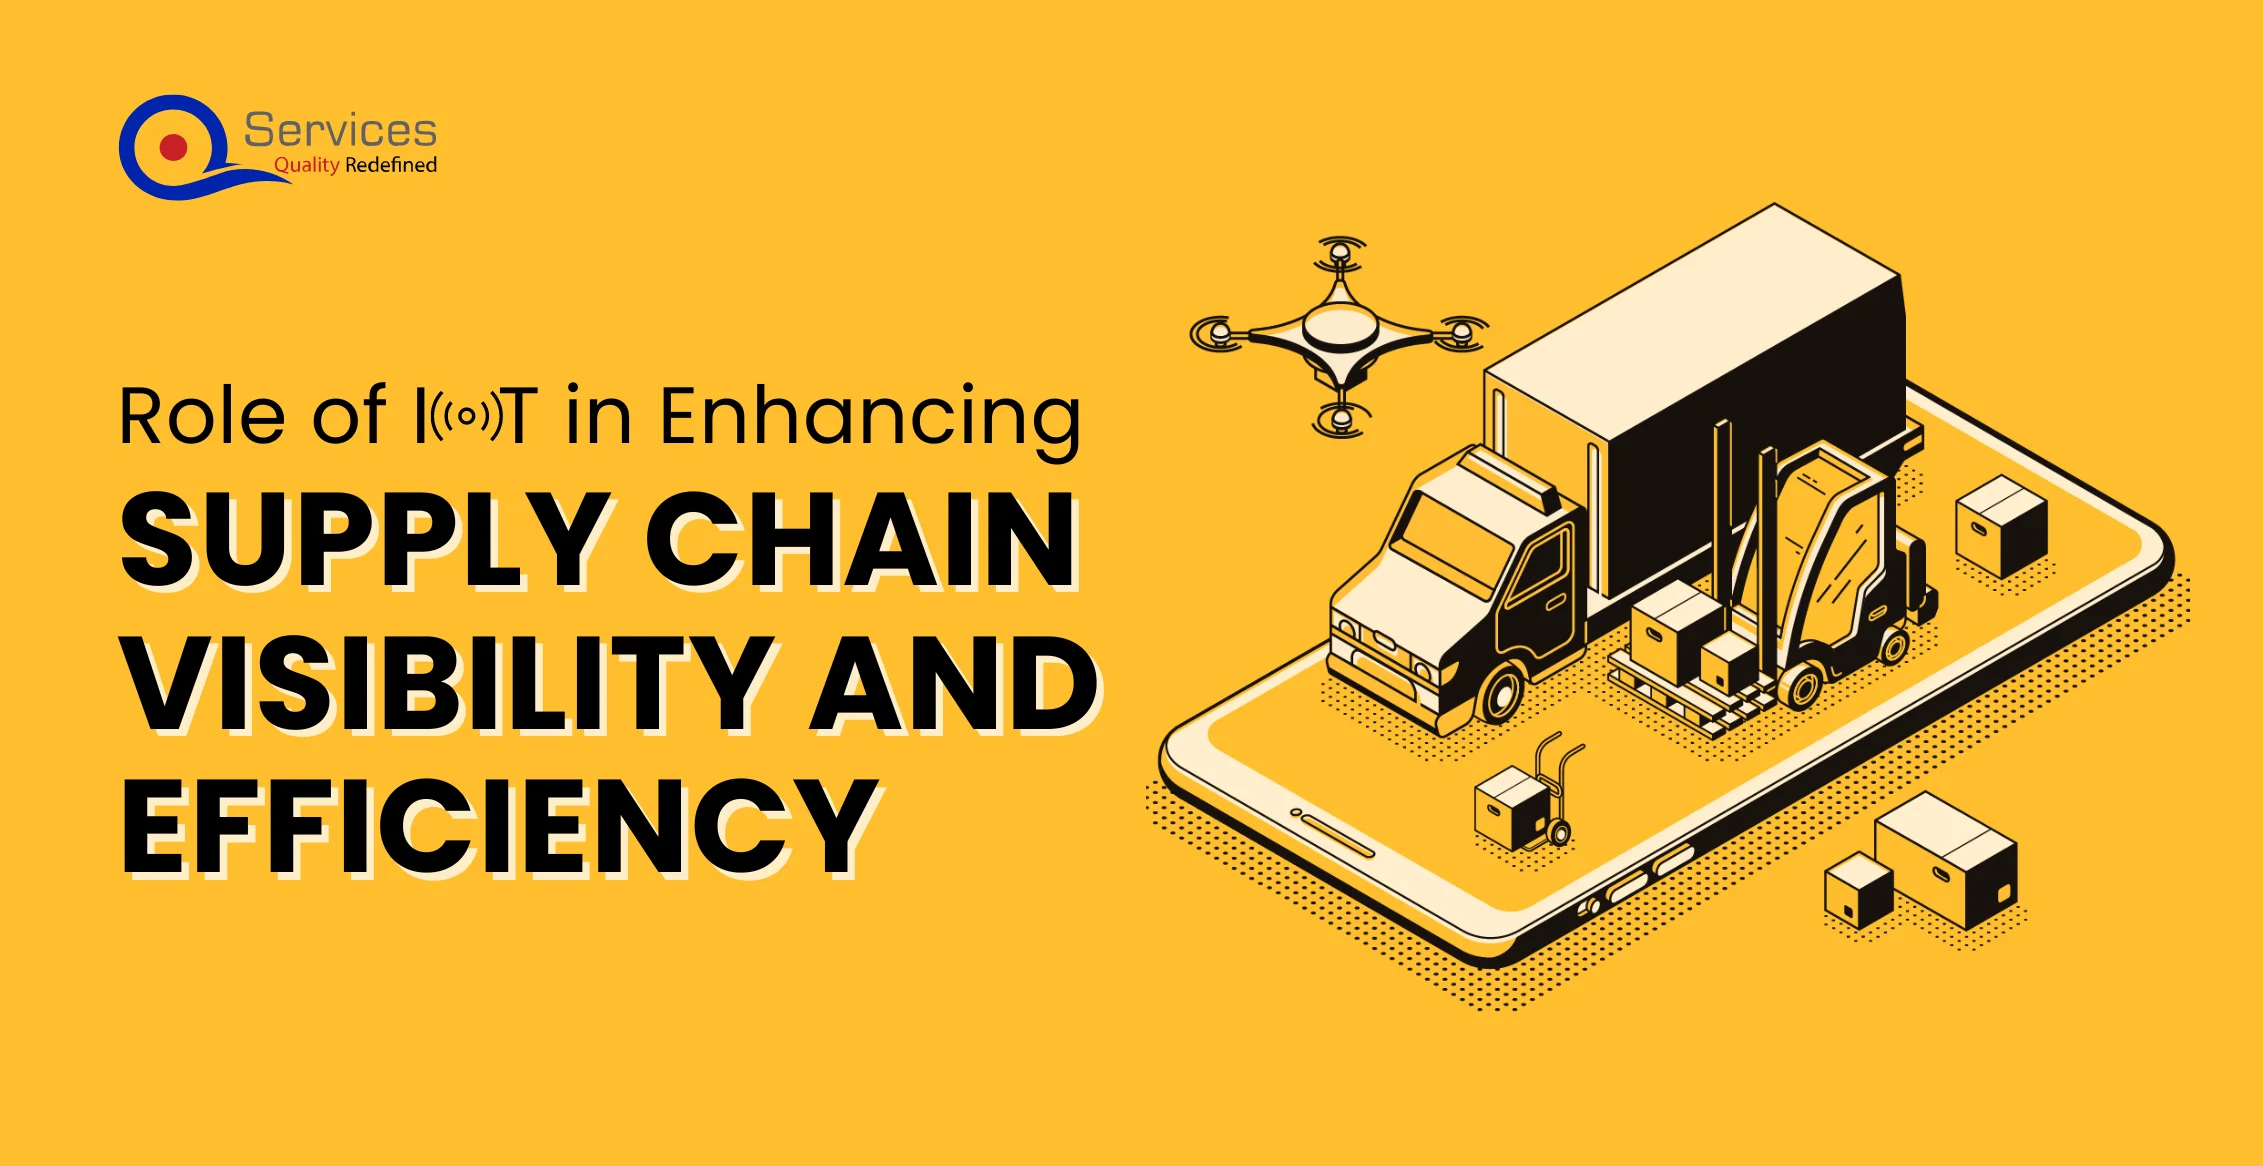 IoT in enhancing Supply Chain Visibility and Efficiency